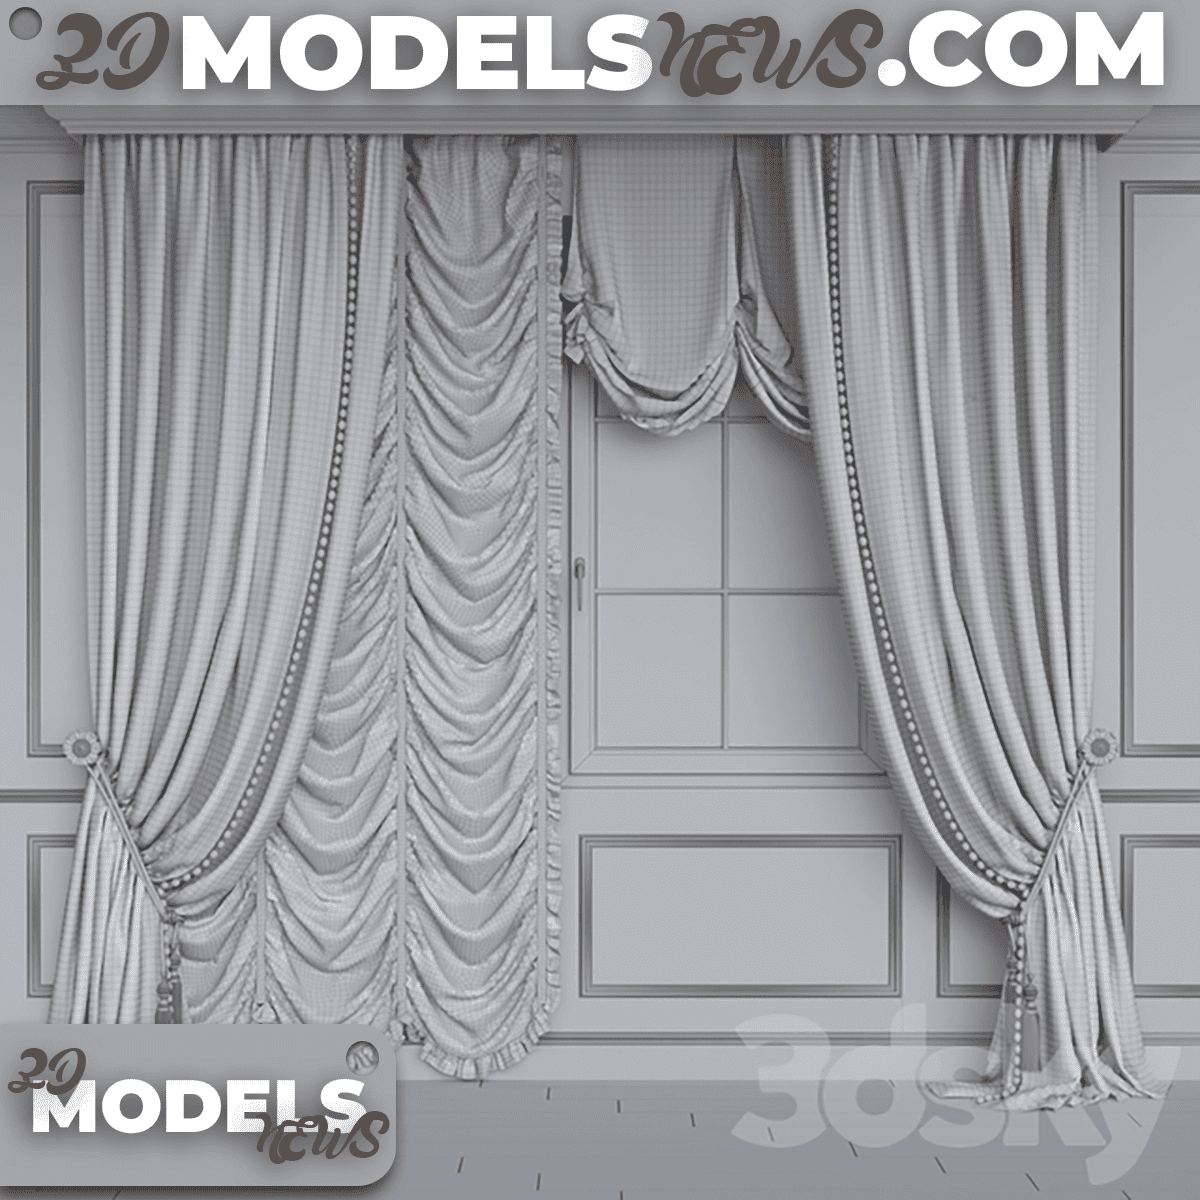 Curtain Model by Portiere 2